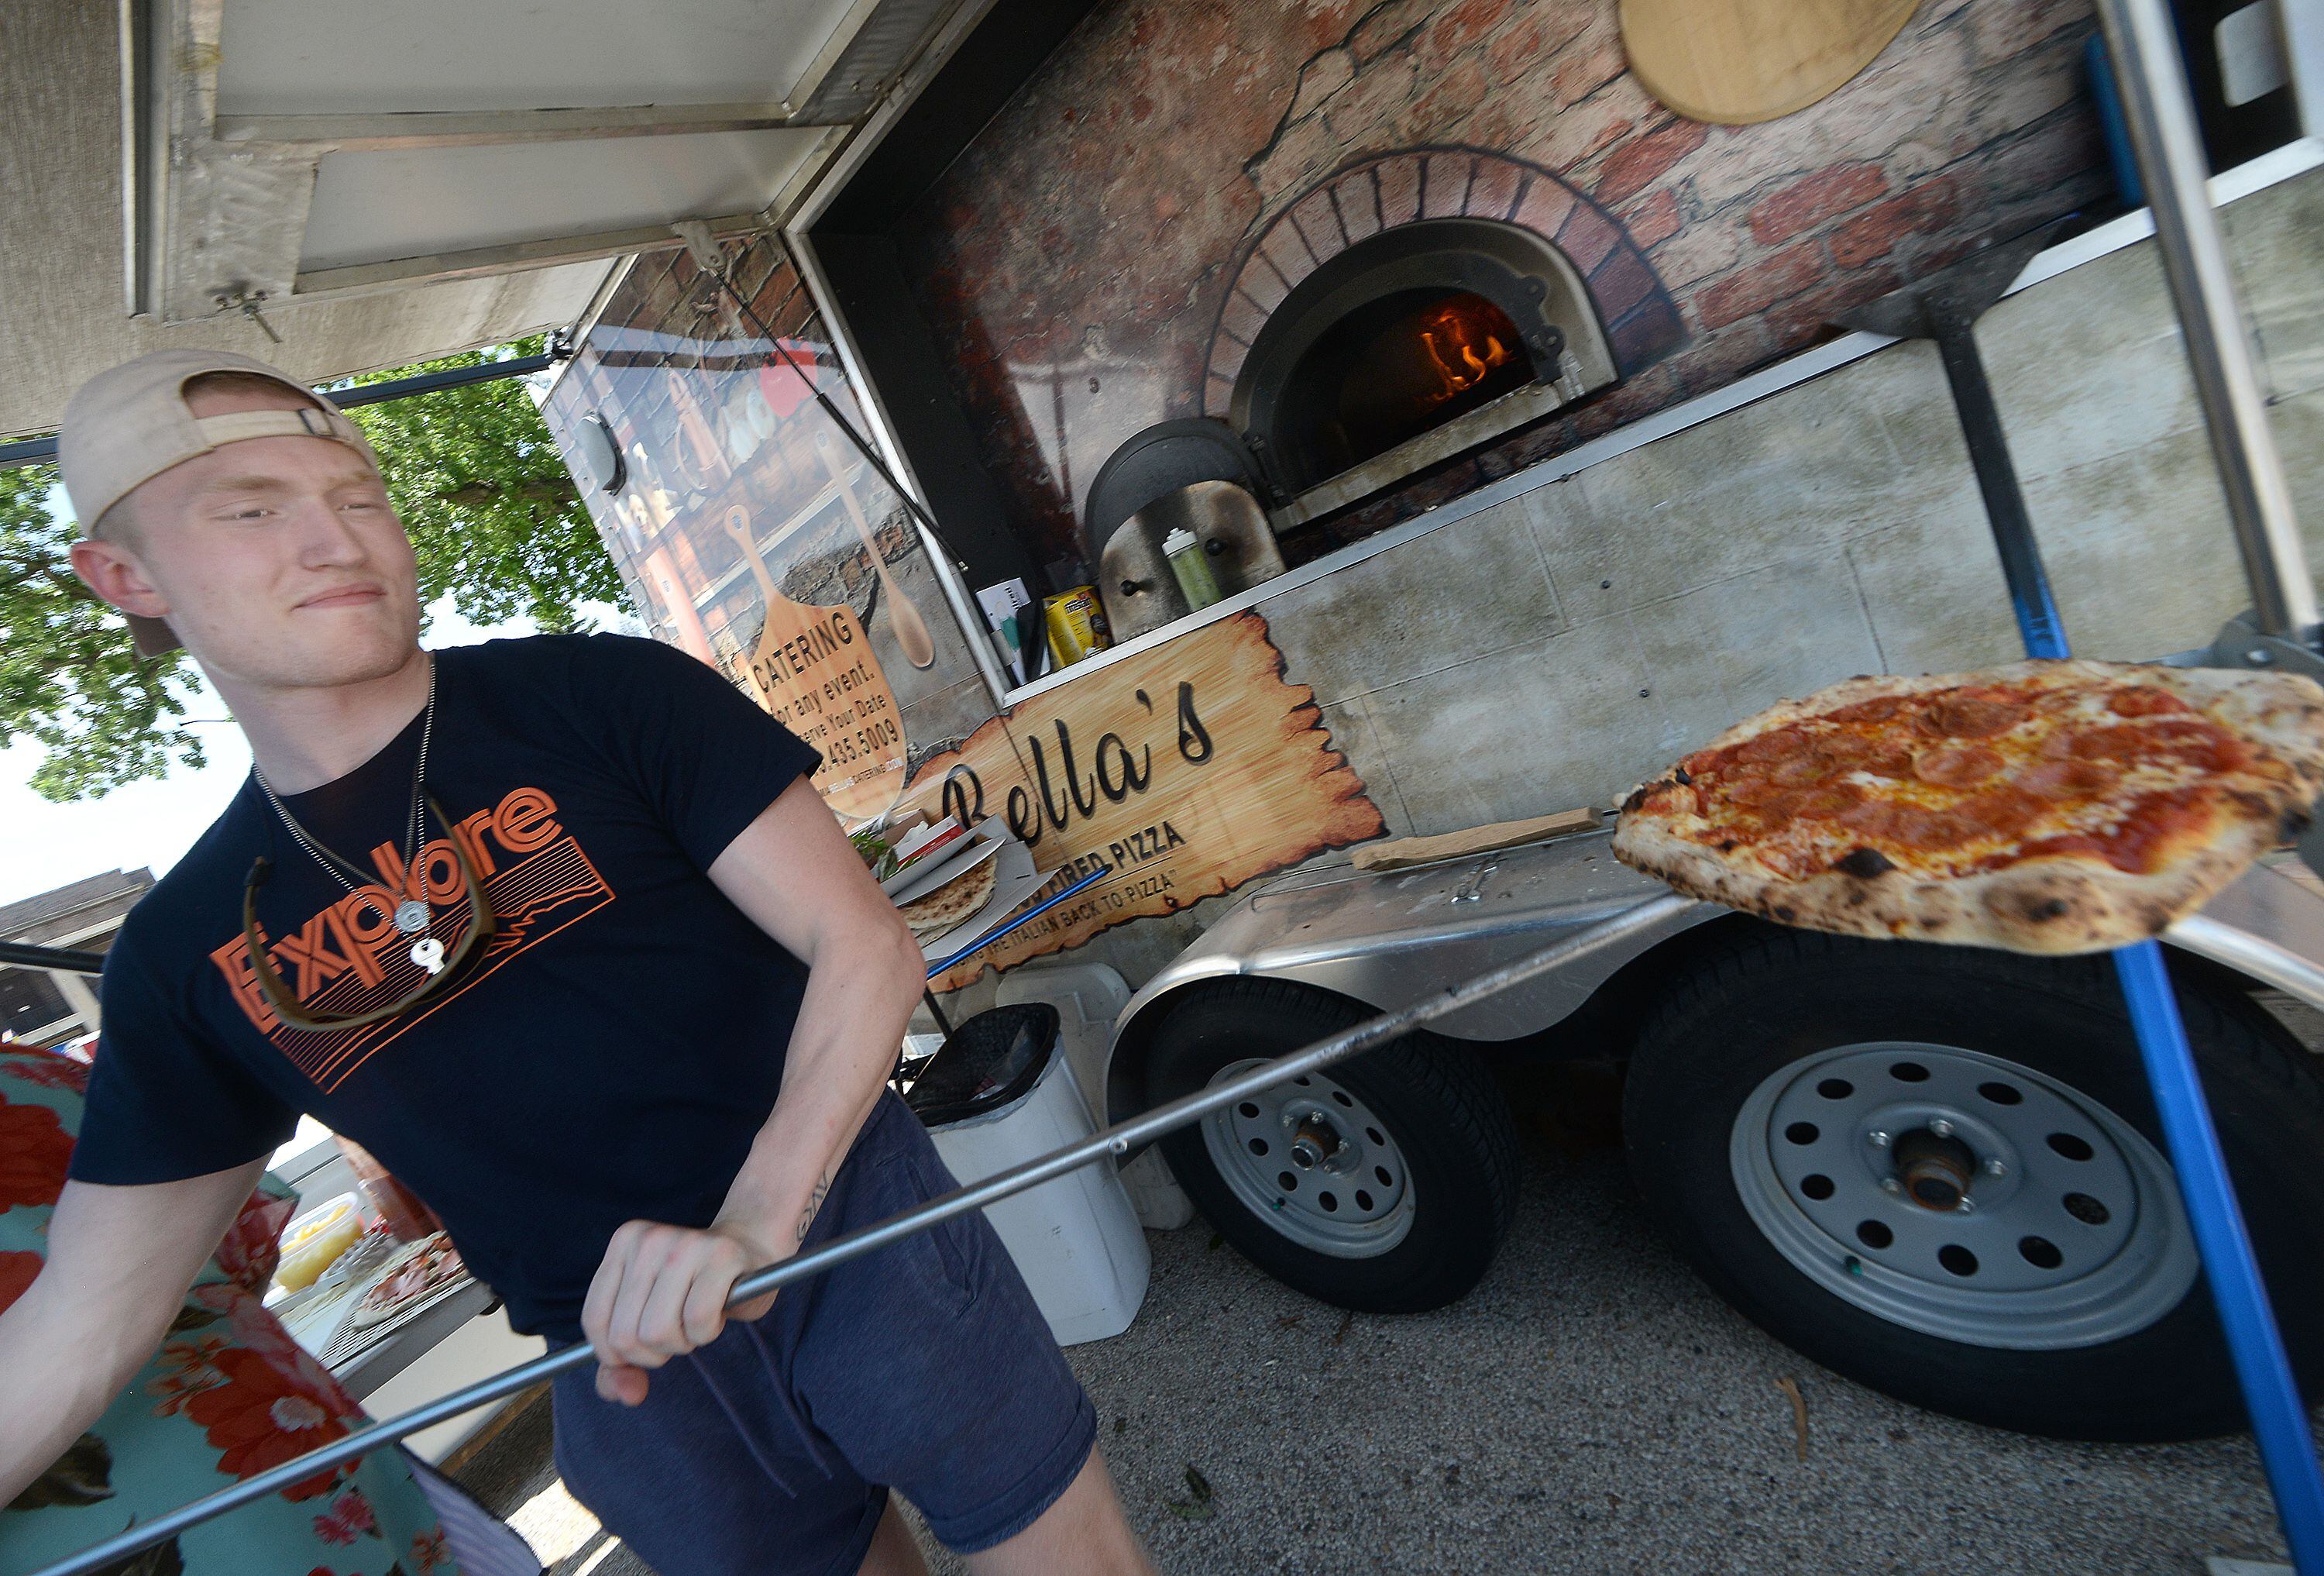 Gerald Harsha, of MiaBella's Wood Fired Pizza, was busy during the 2021 Food Truck Festival in Streator City Park as many lined up for a wood fired pizza.